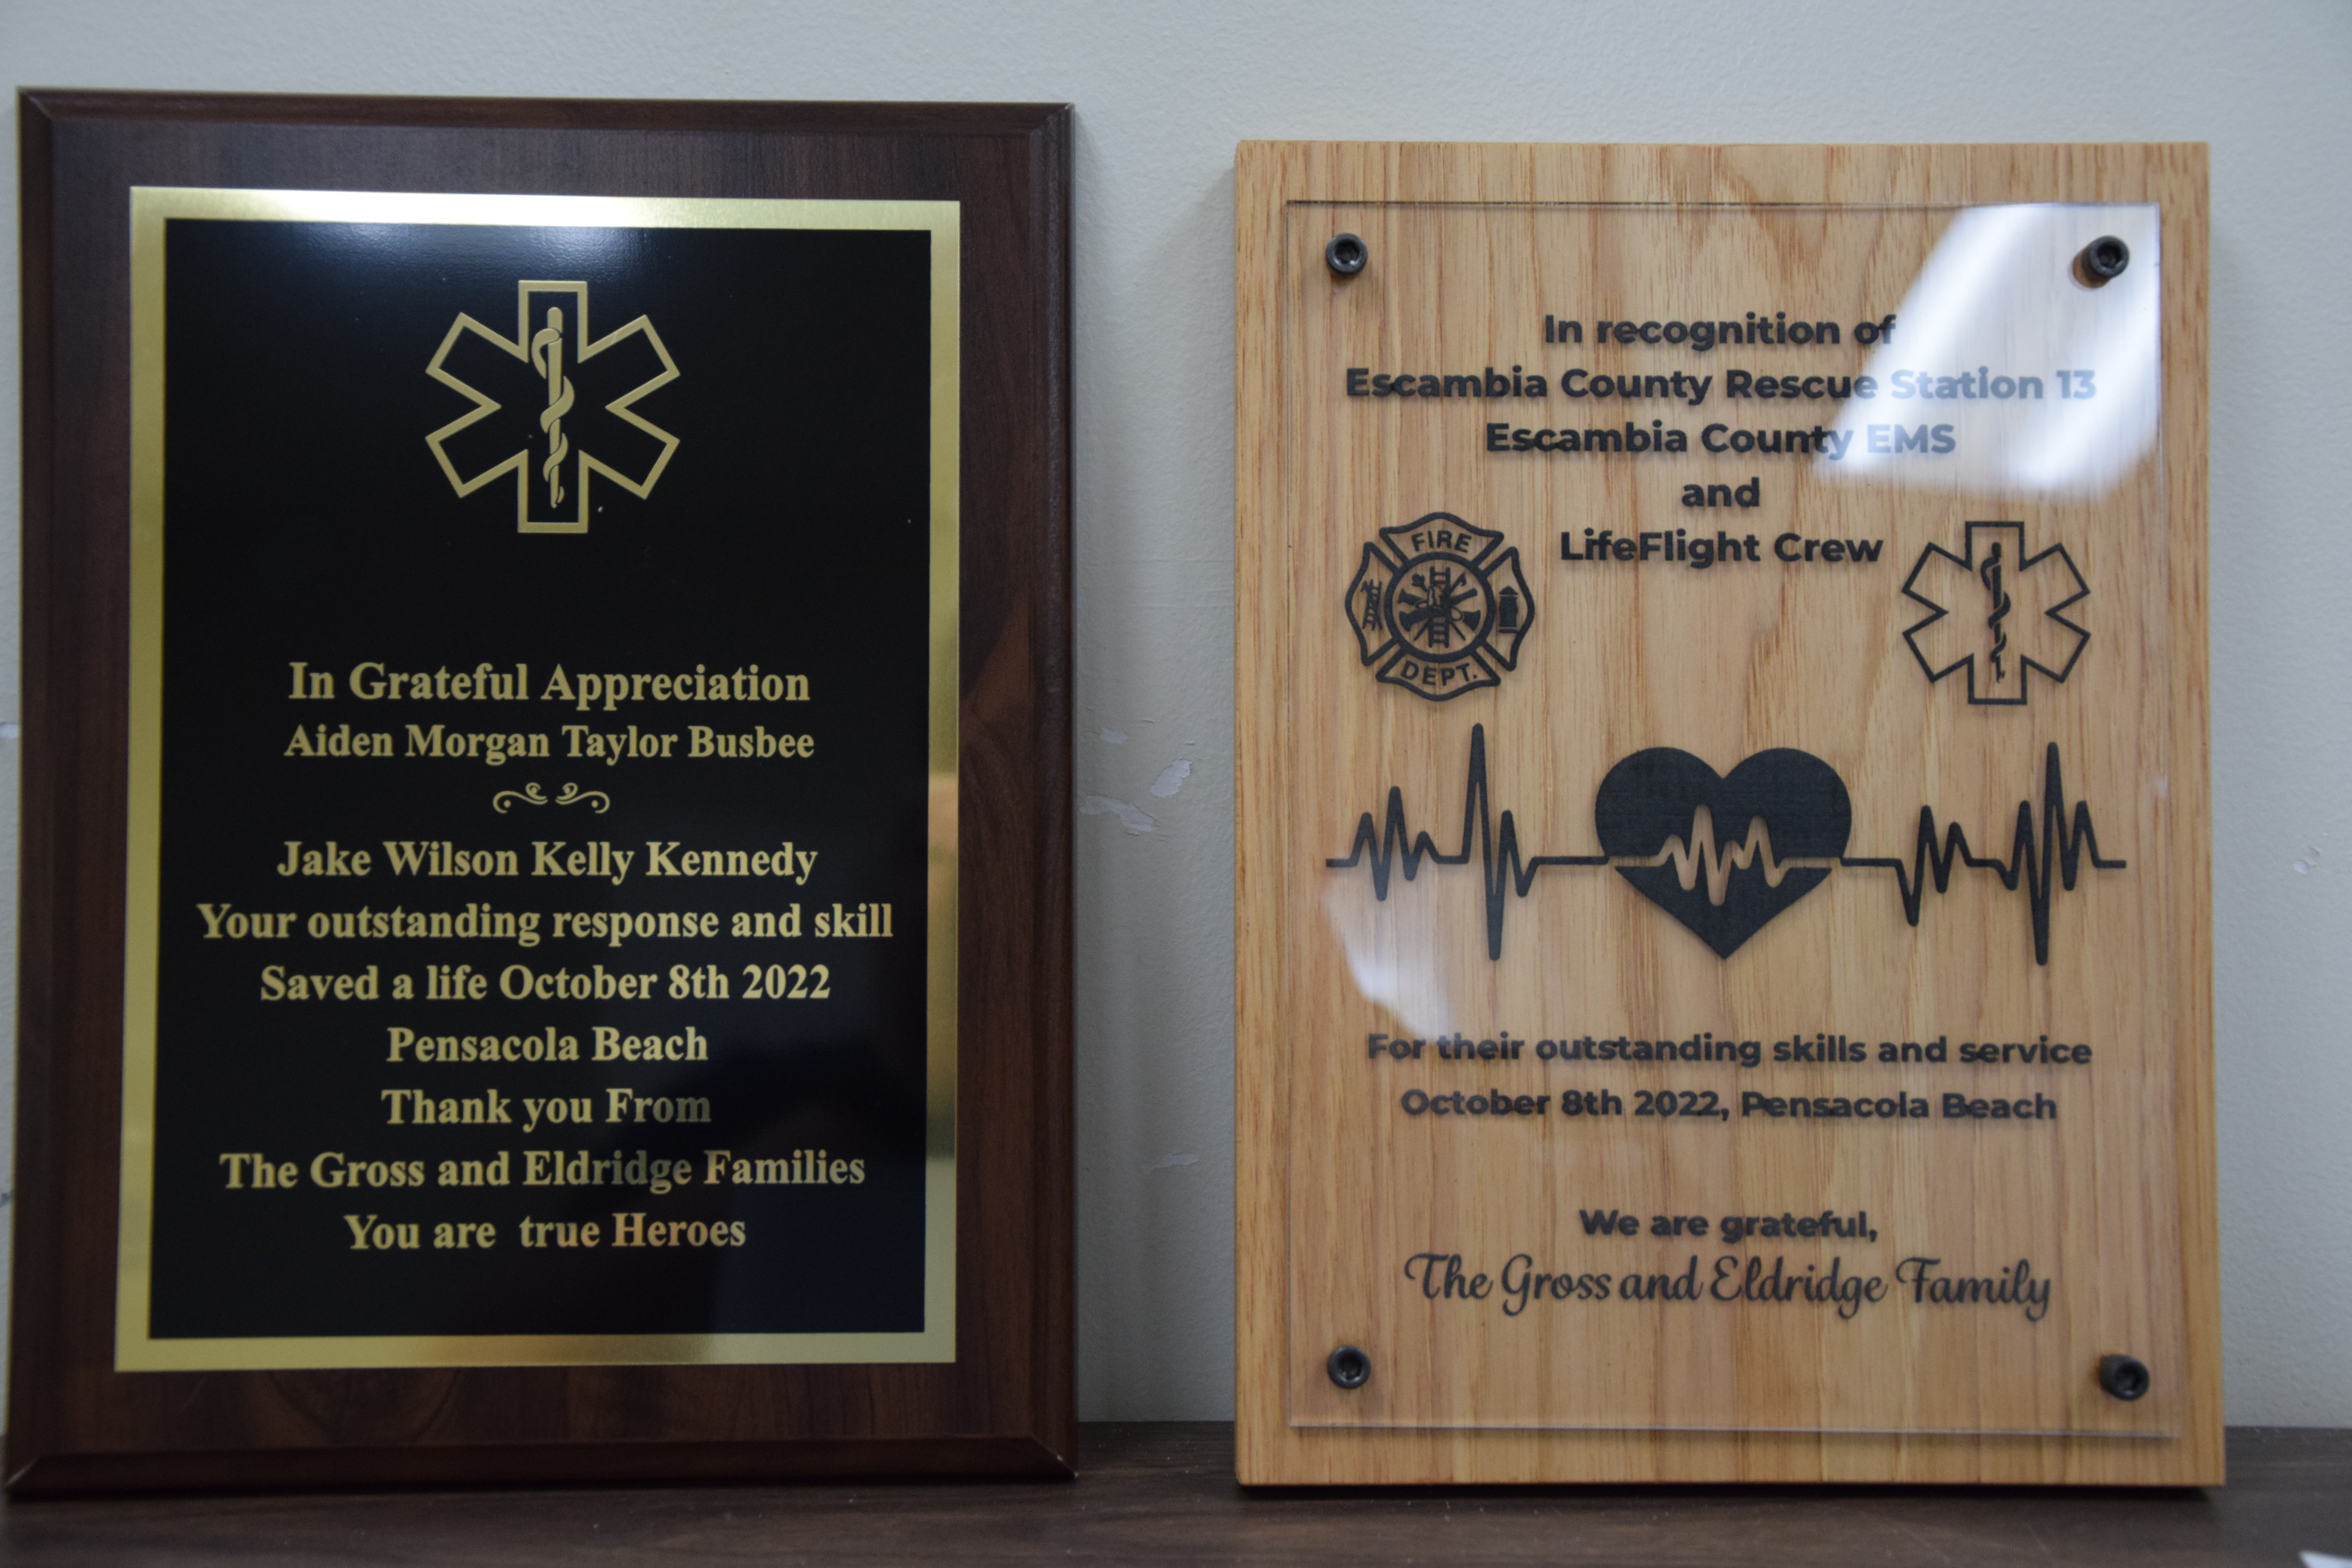 Pictures of the plaques given to first responders